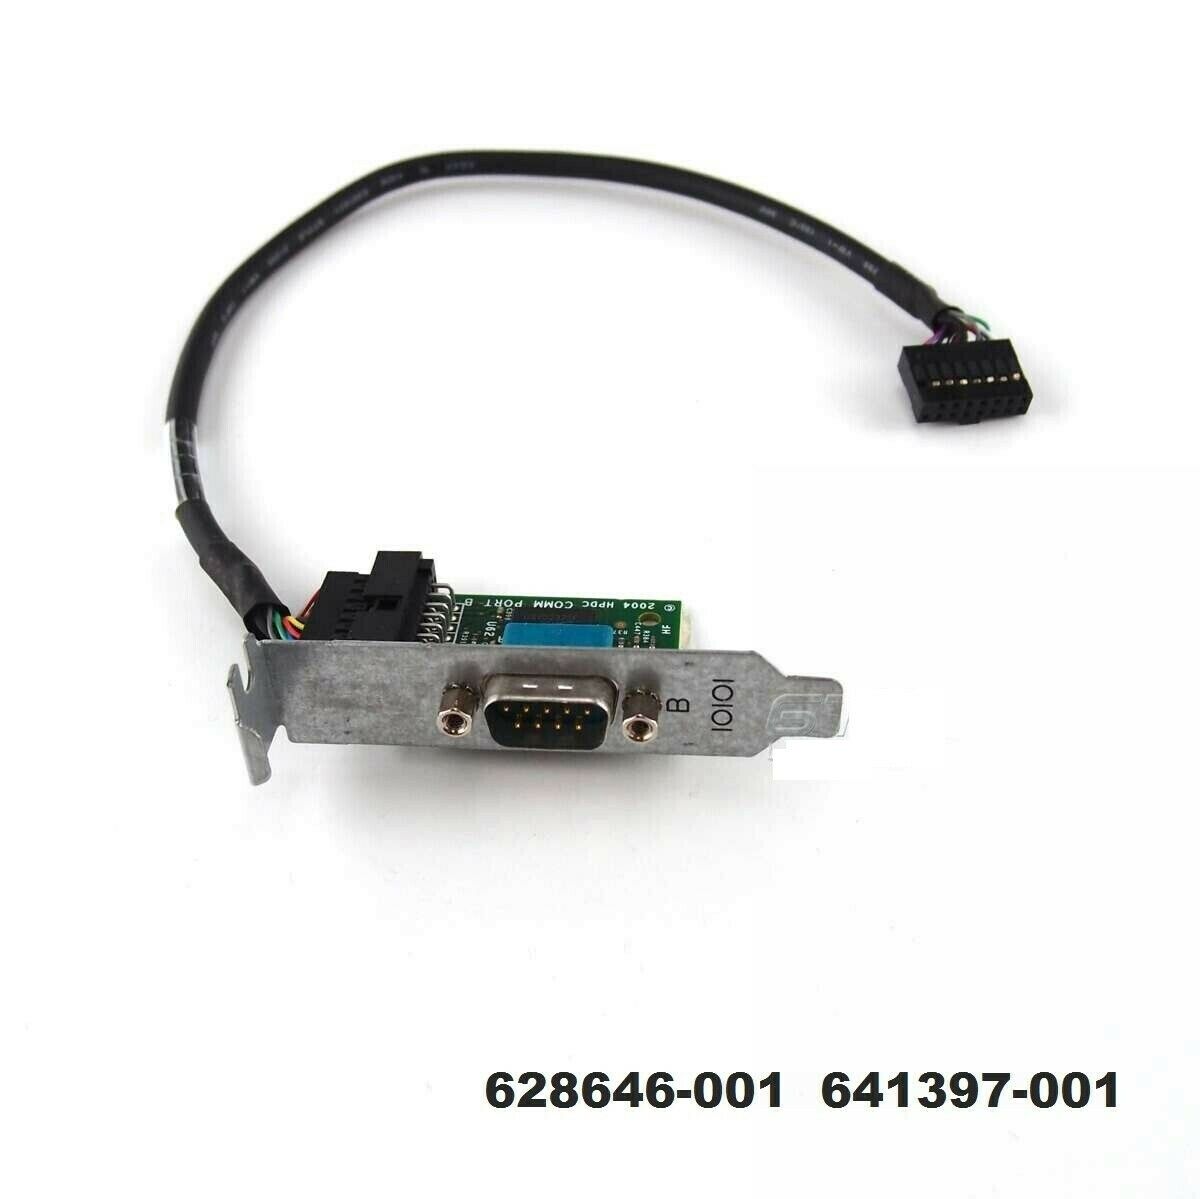 HP Serial Port Adapter with Low Profile Cable 628646-001 641397-001 012711-001